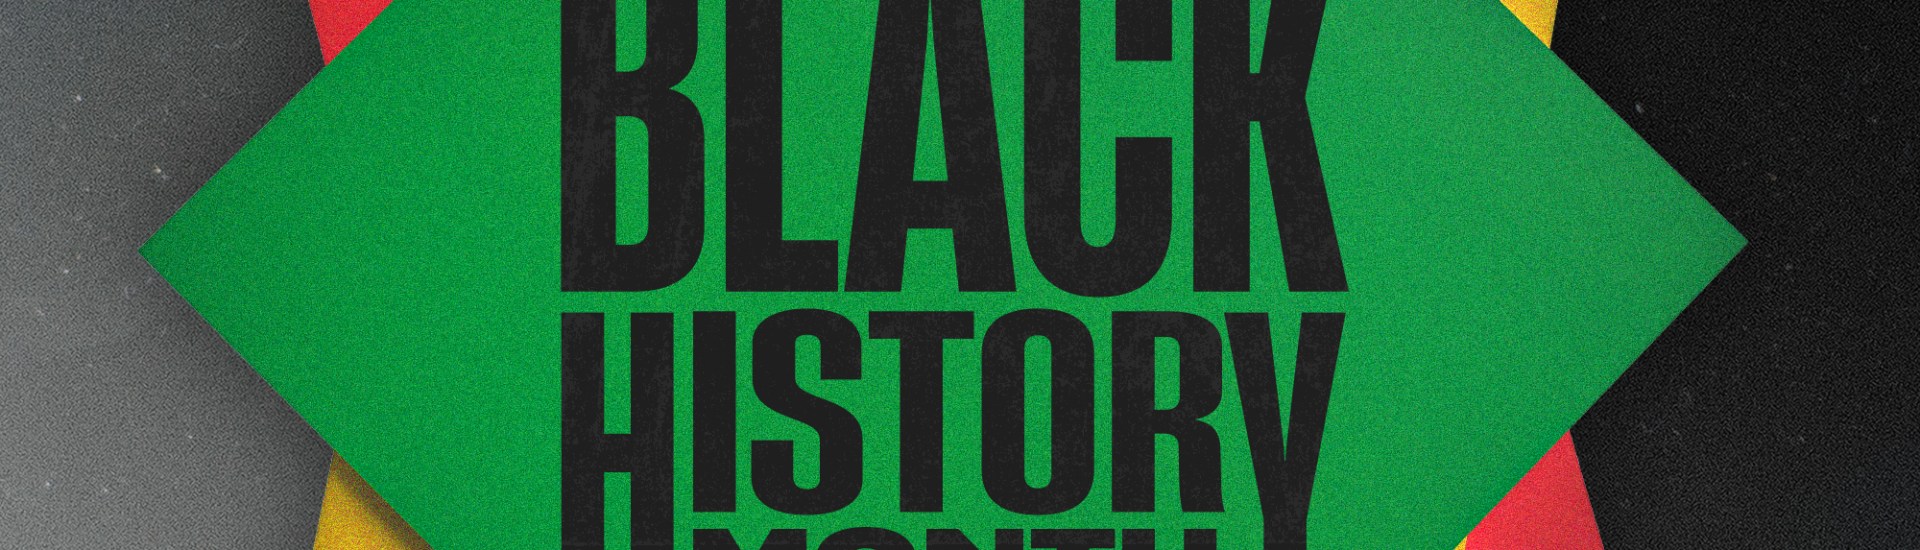 "Black History Month" text on top of green, yellow and red paper stacked into a design.